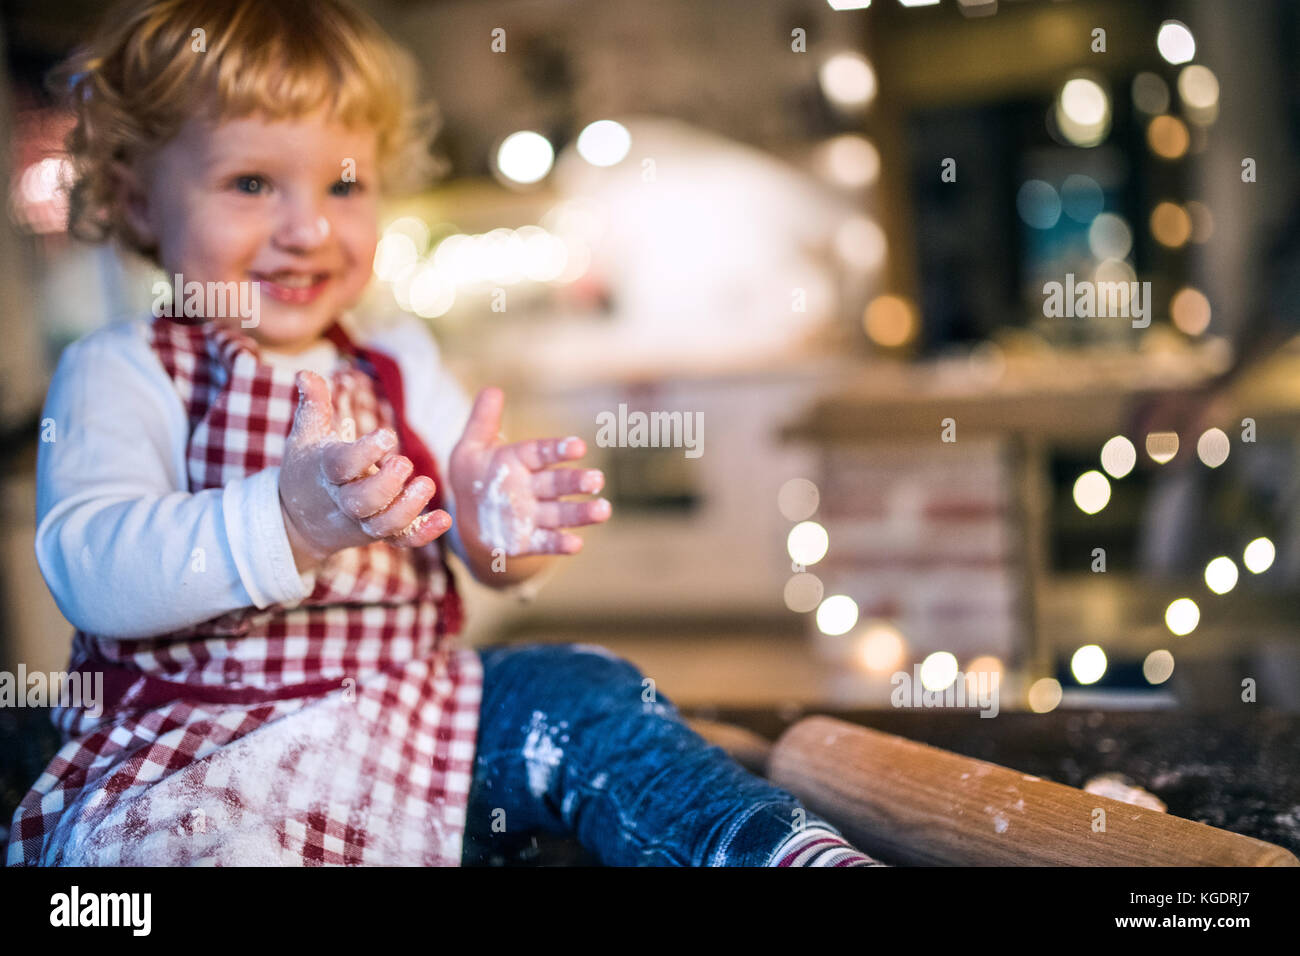 Toddler boy making gingerbread cookies at home. Stock Photo